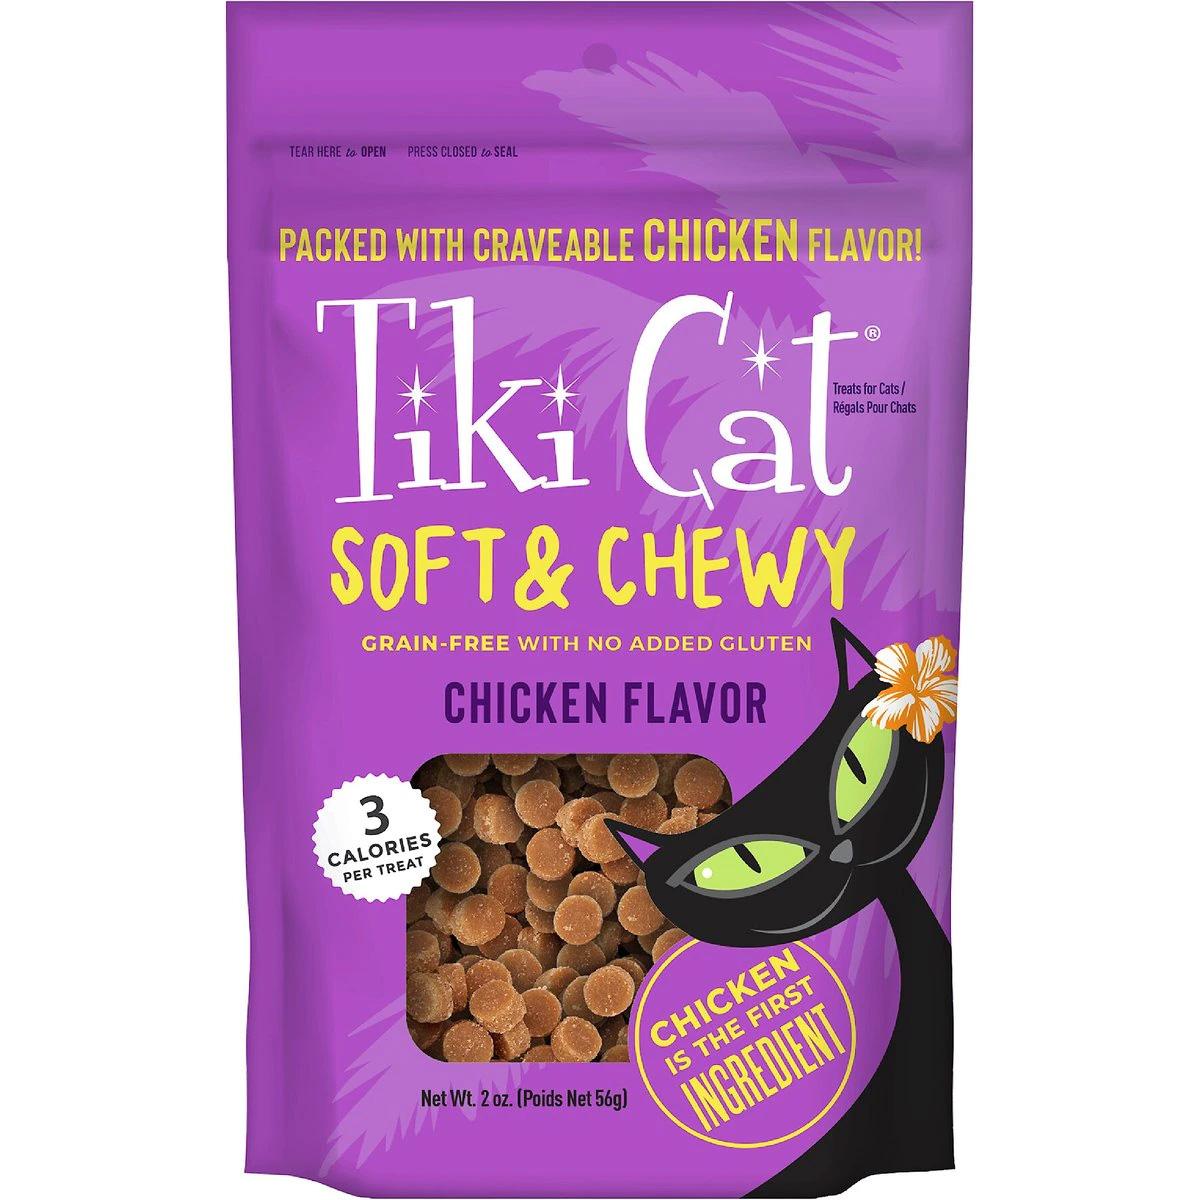 Tiki Cat Soft and Chewy Chicken Recipe Cat Treats 4 Pack for $3.67